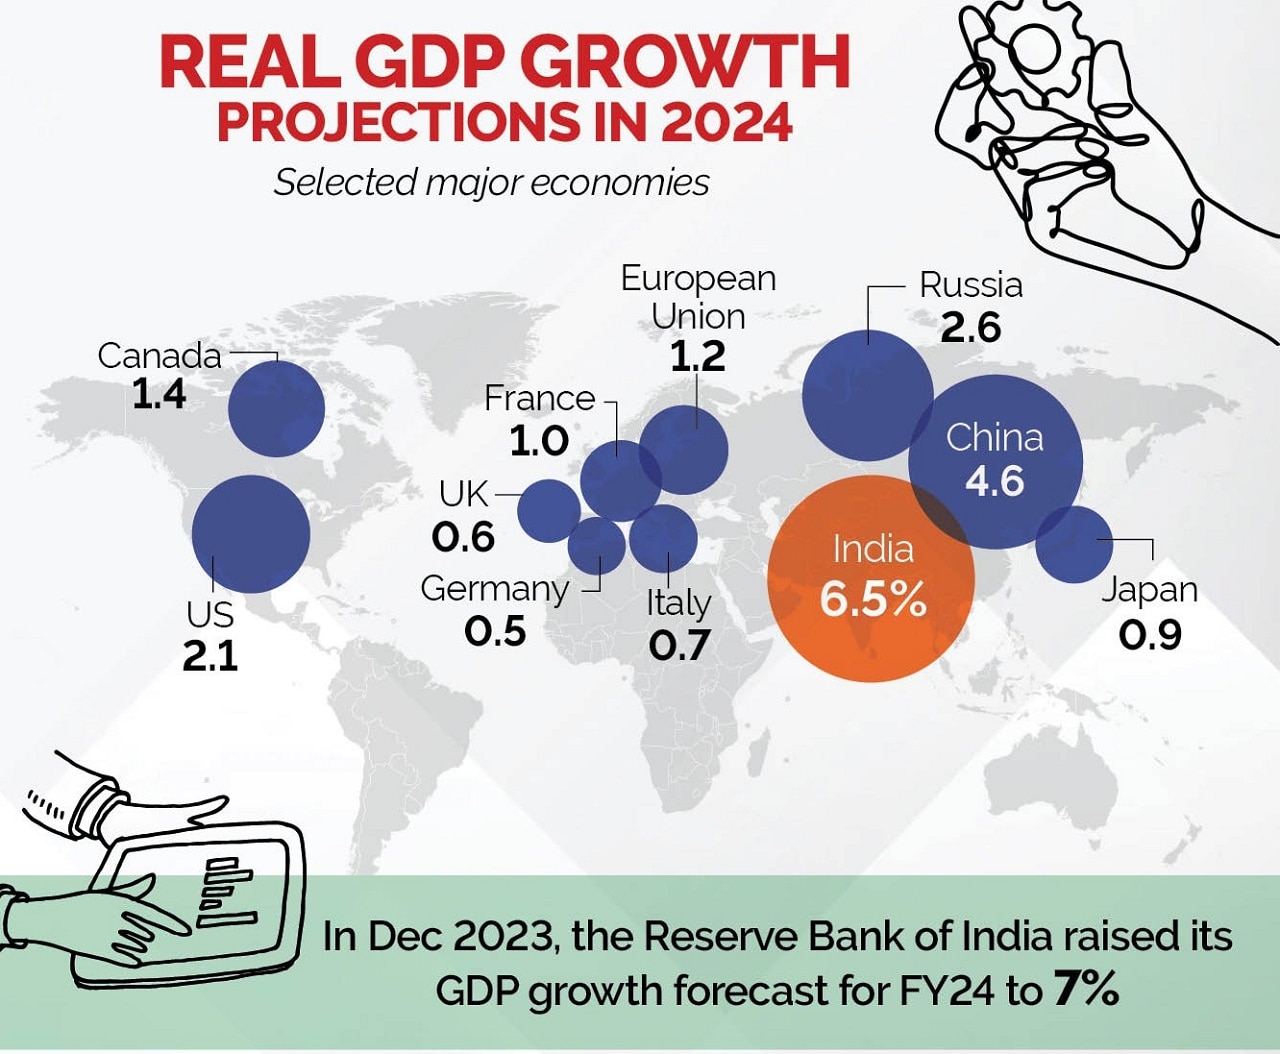 The International Monetary Fund (IMF) and Nomura, a global investment bank, expect the world's largest democracy to witness a 7% growth in gross domestic product (GDP) in 2024, which would be tough to ignore for global investors looking for investment opportunities in Asia.